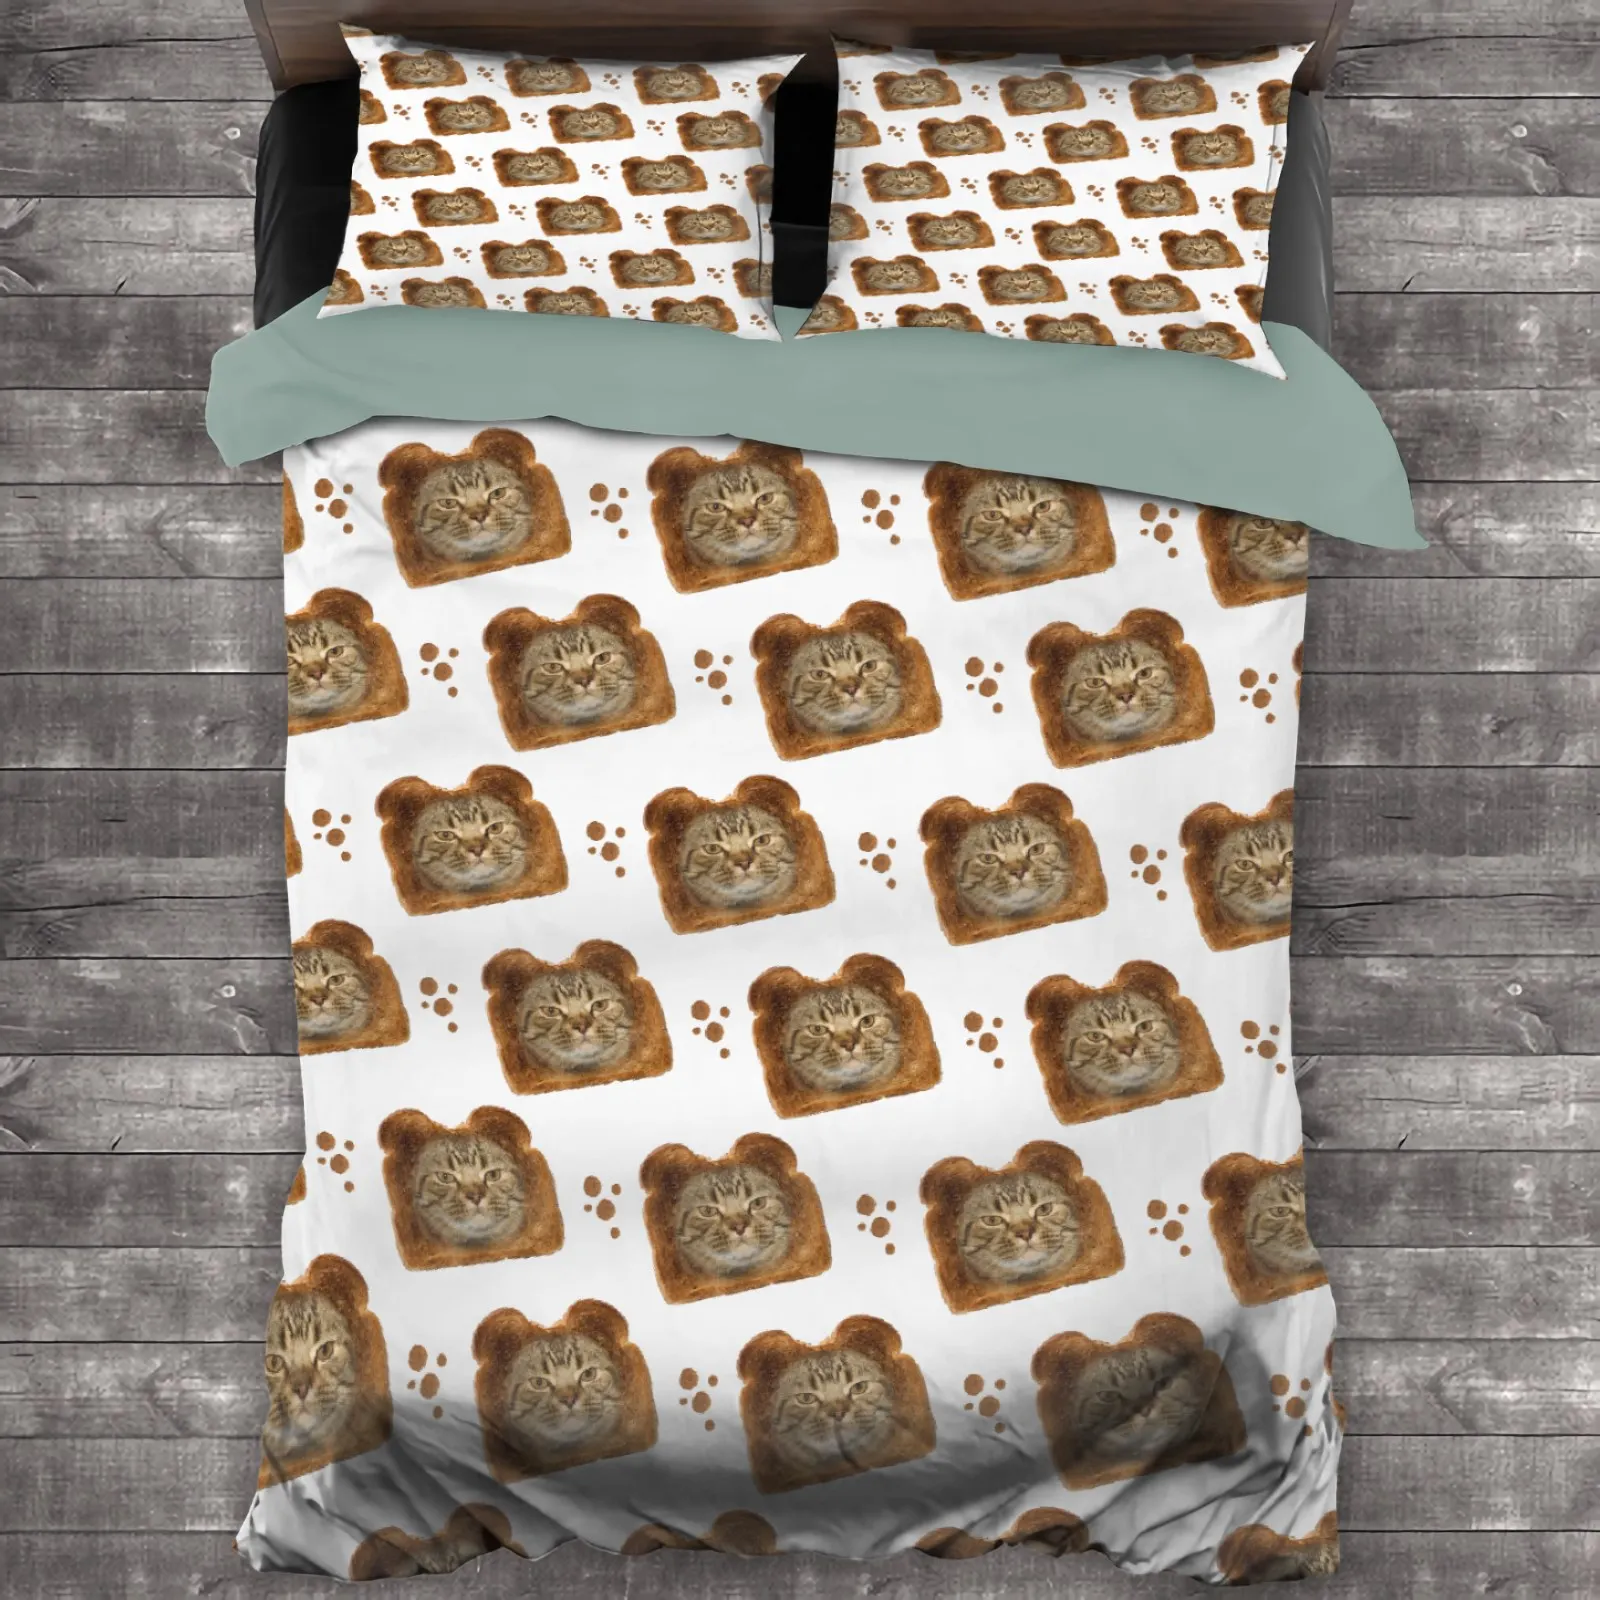 

Funny Bread And Cat Print Duvet Cover Set Single Double Queen Size Bedding Sets Soft Home Textiles Quilt Covers Bedclothes